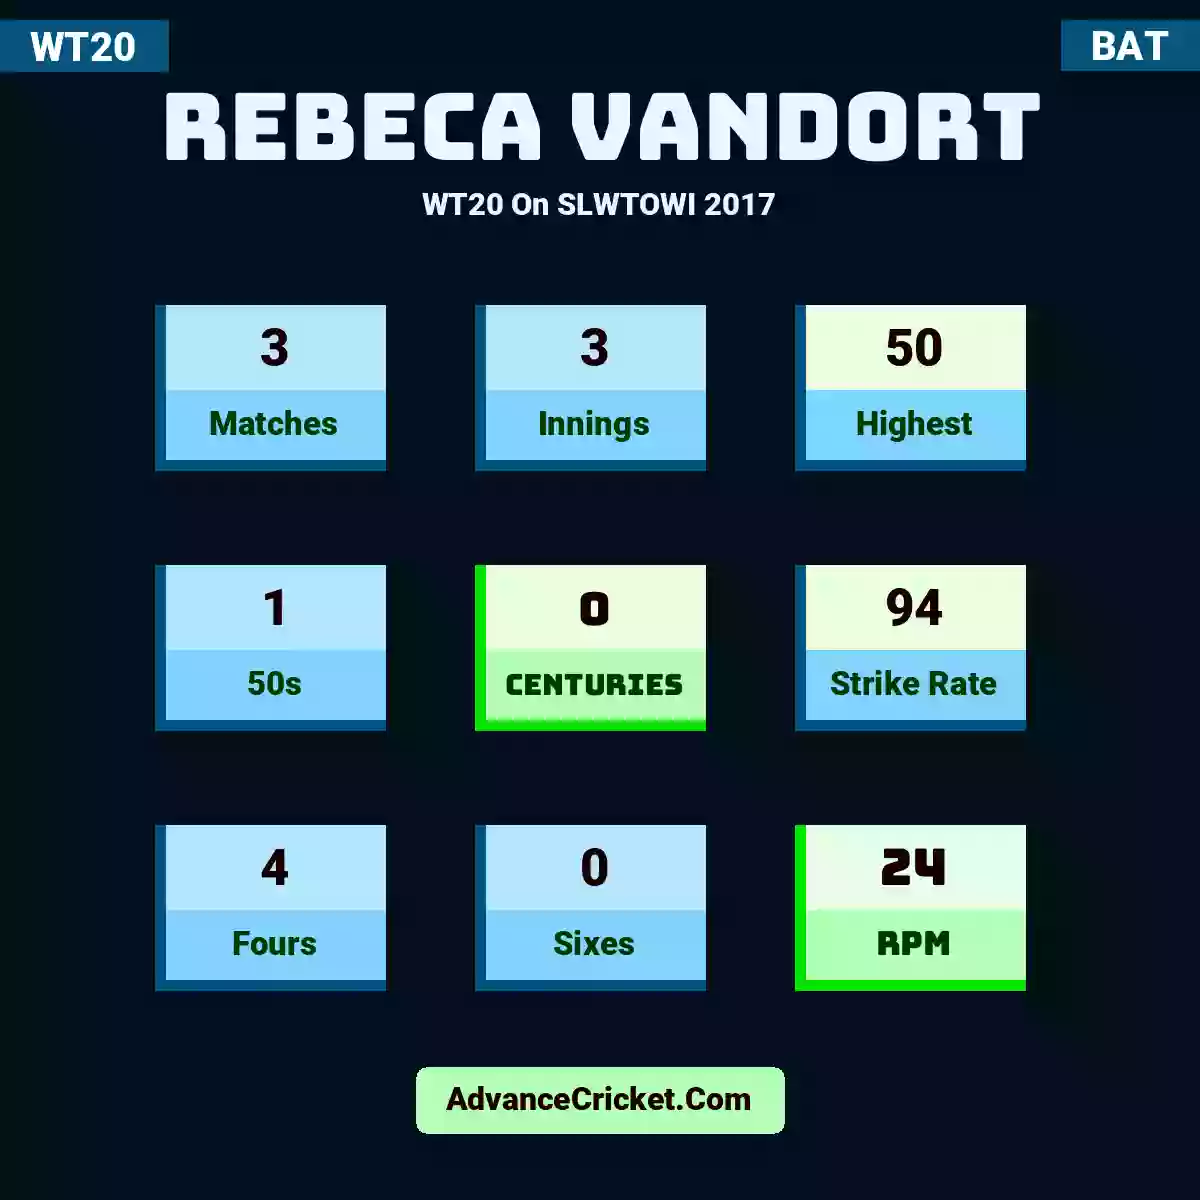 Rebeca Vandort WT20  On SLWTOWI 2017, Rebeca Vandort played 3 matches, scored 50 runs as highest, 1 half-centuries, and 0 centuries, with a strike rate of 94. R.Vandort hit 4 fours and 0 sixes, with an RPM of 24.